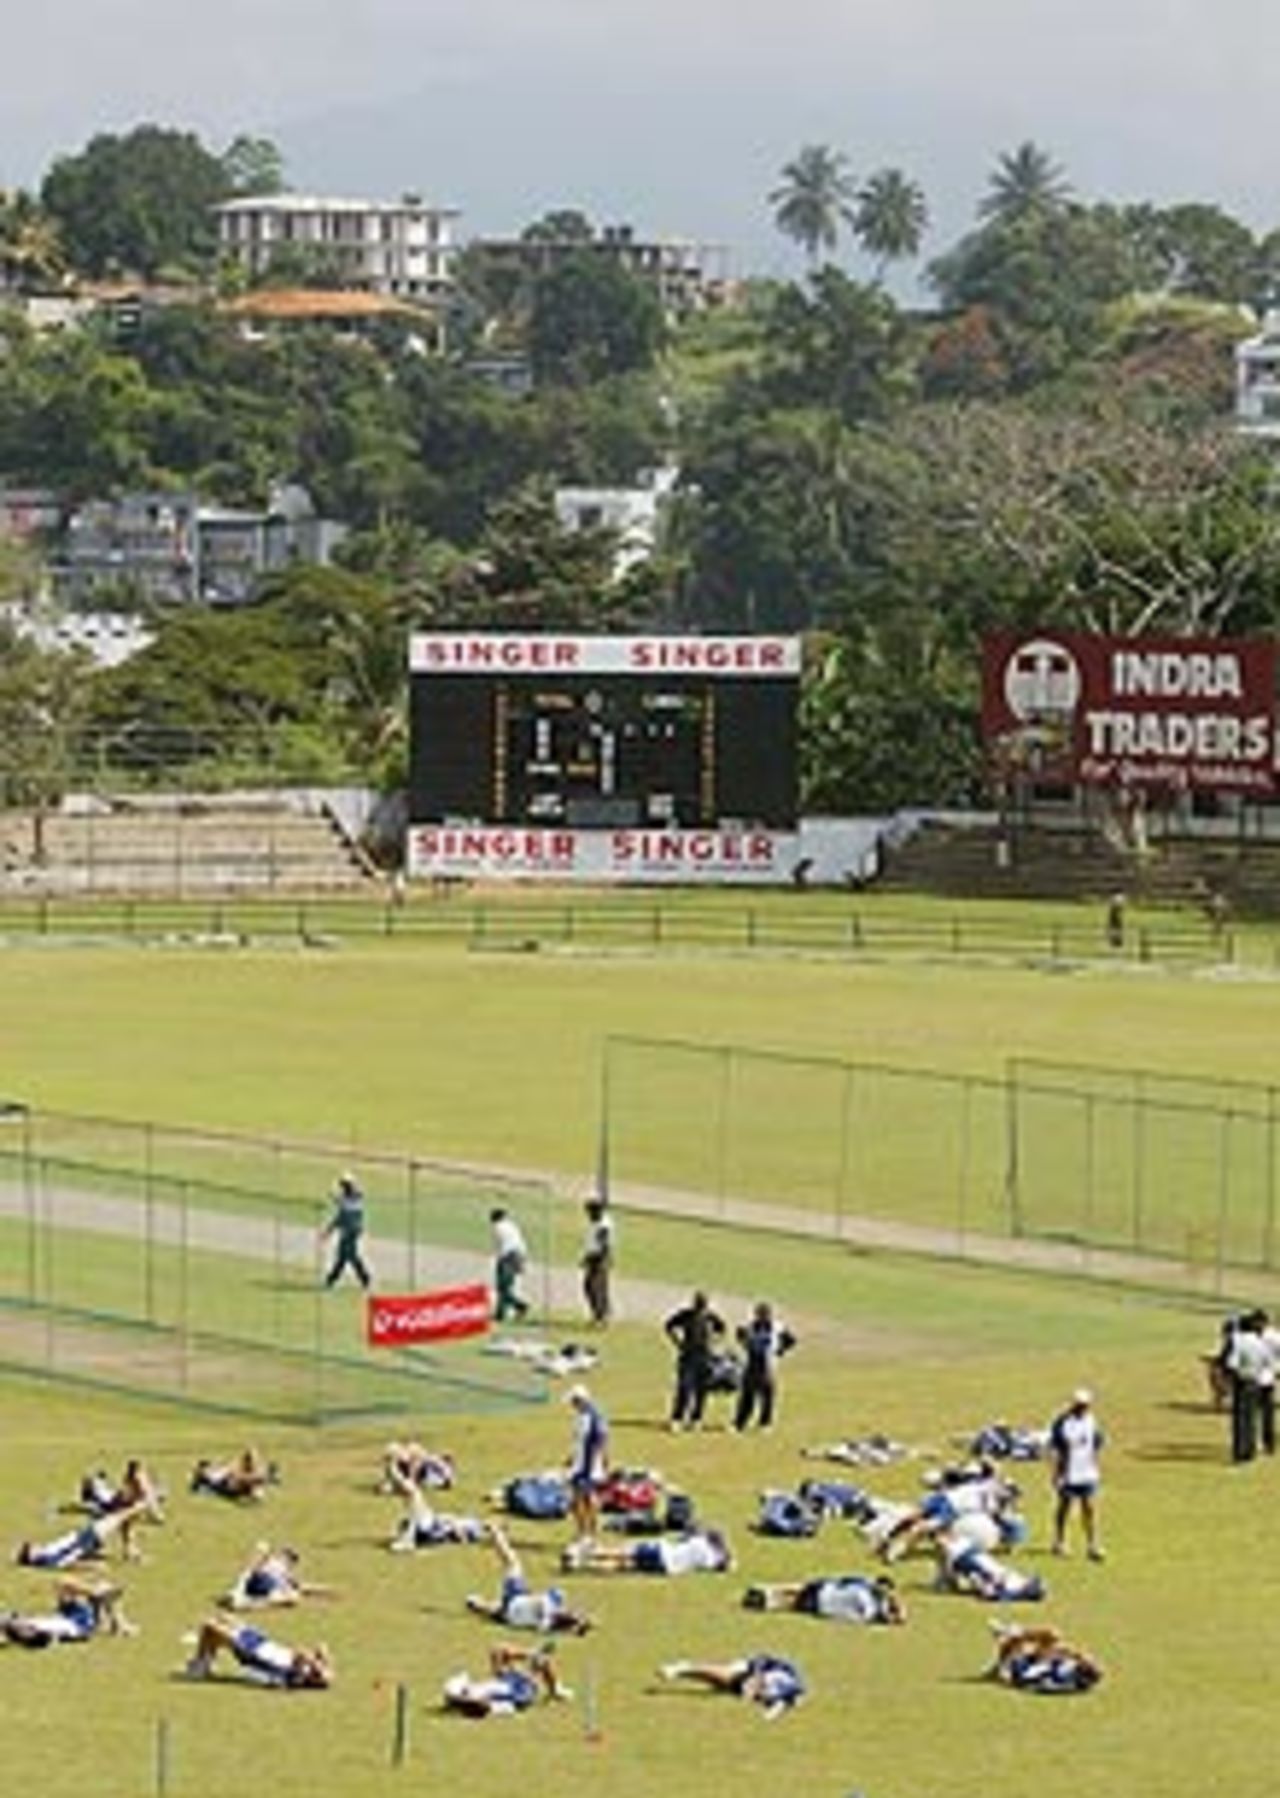 The scene in Kandy as England prepare for the second Test